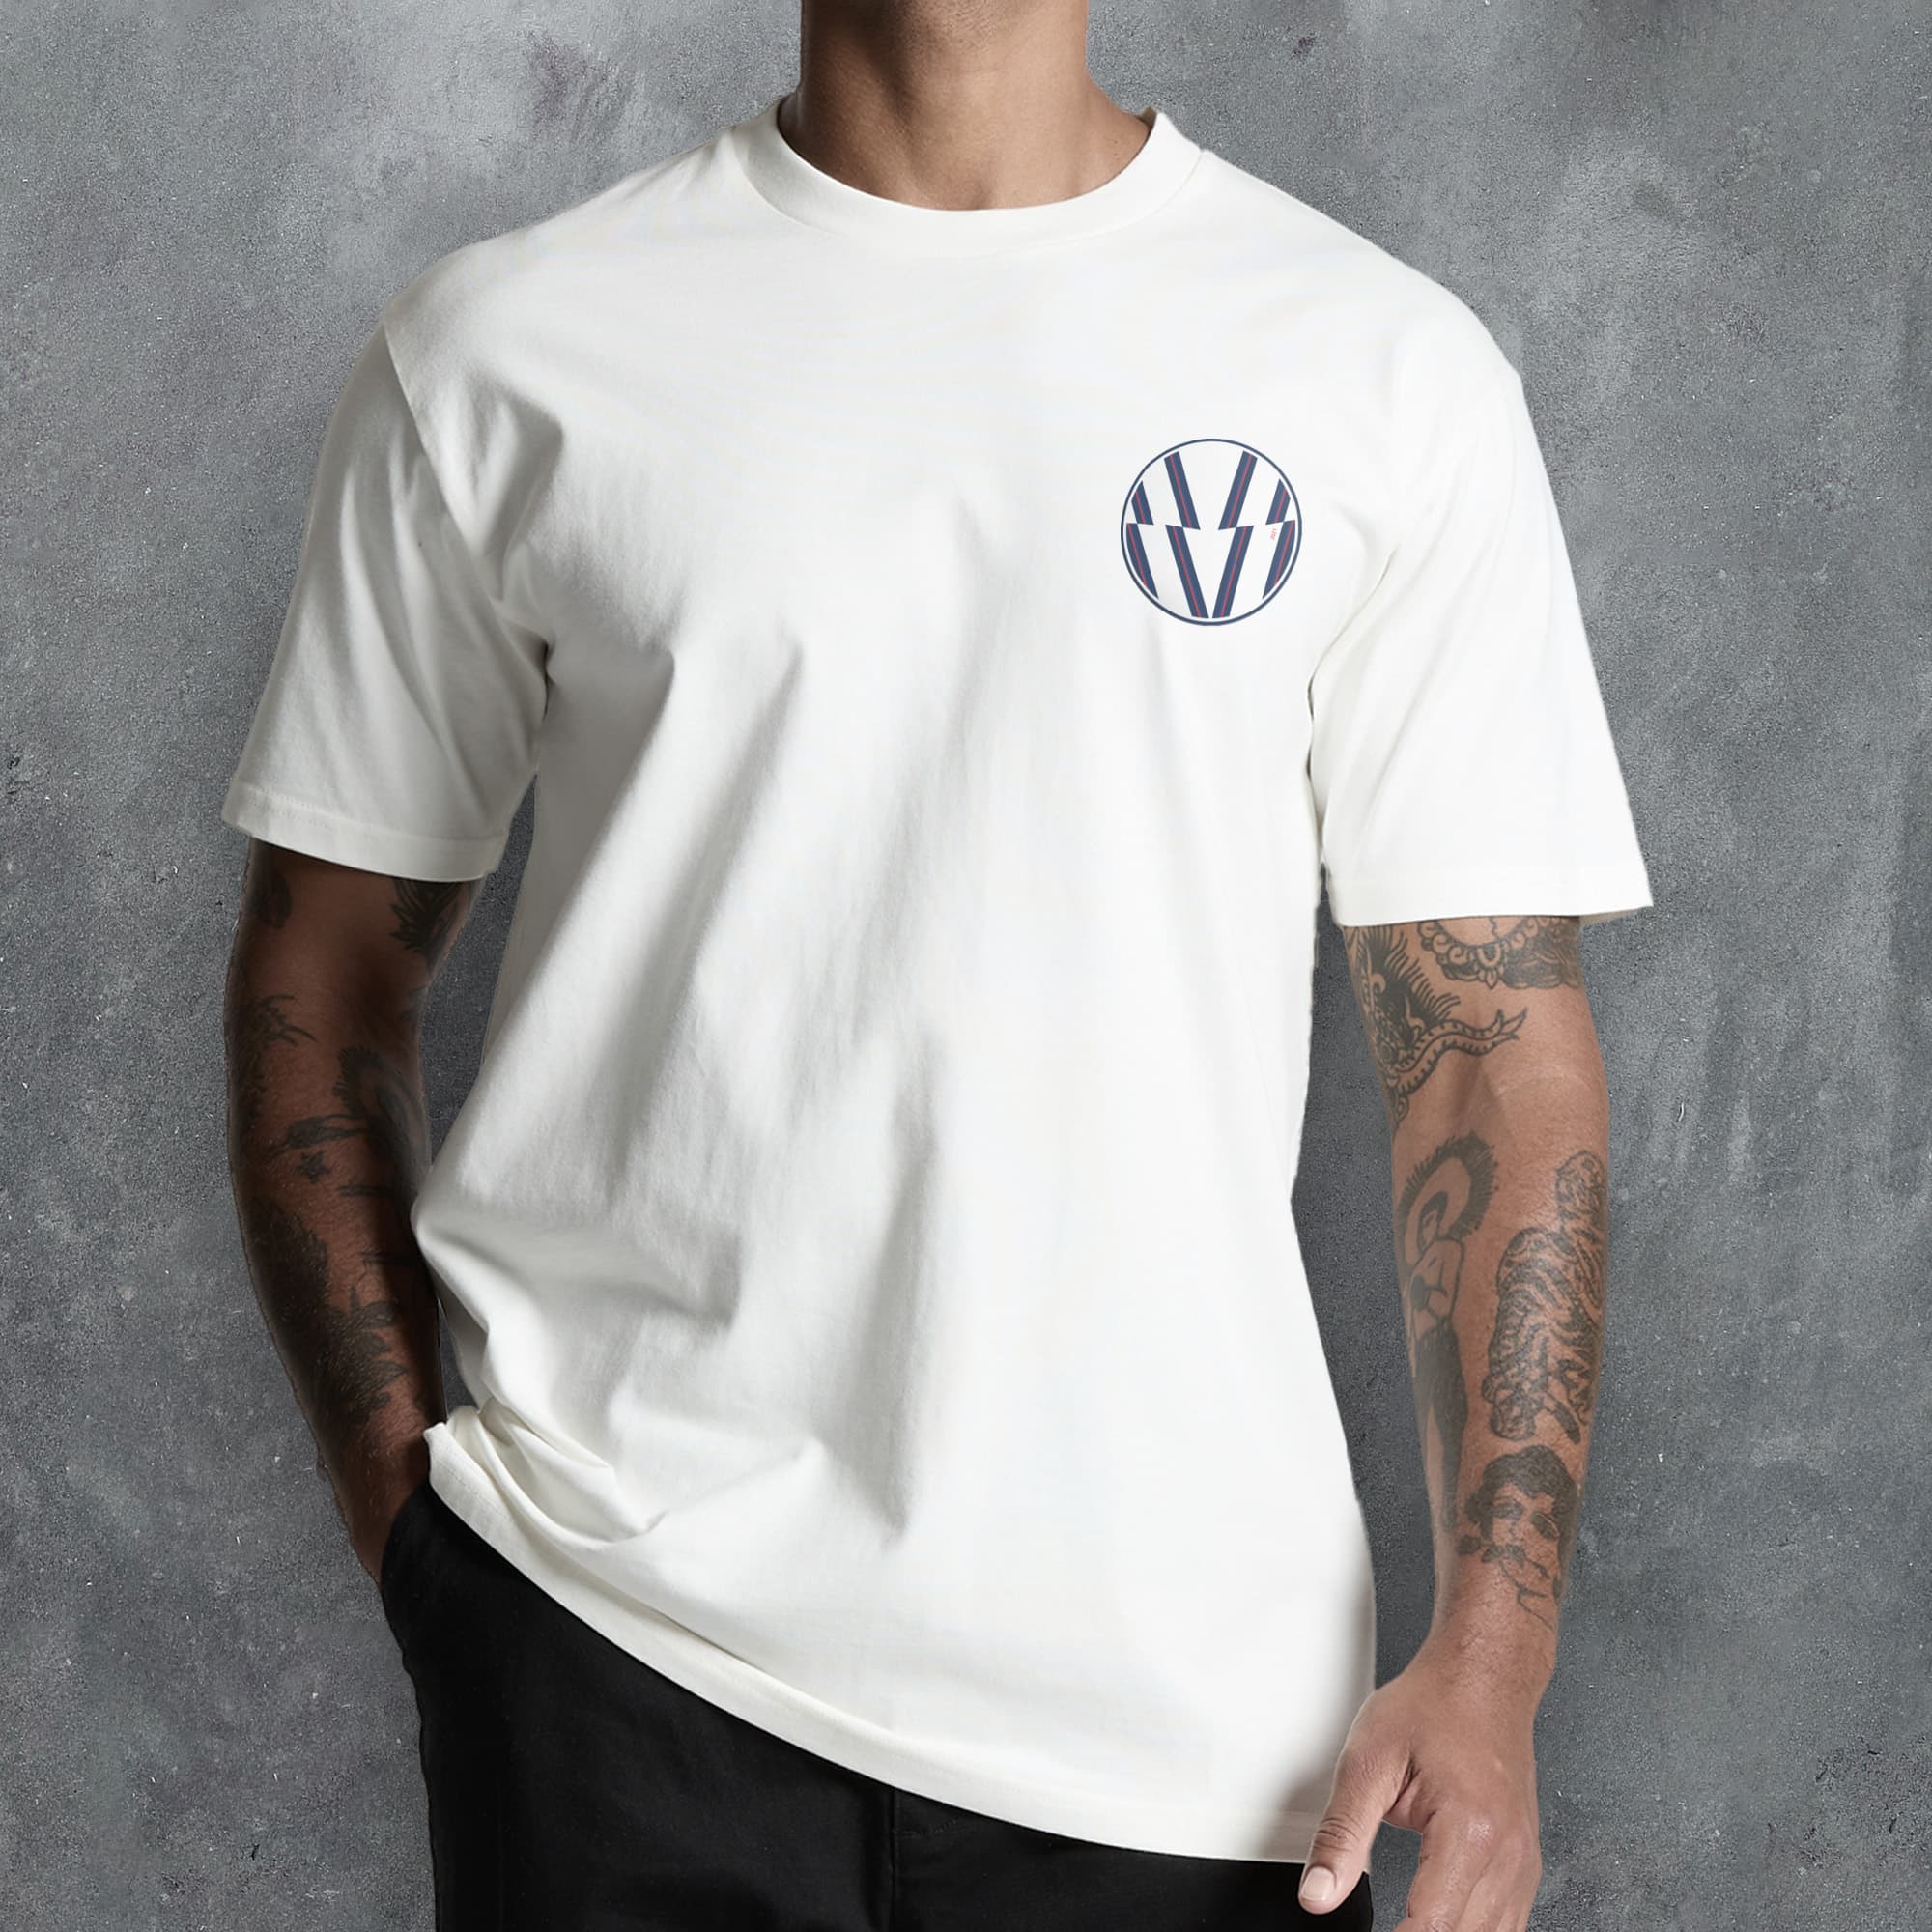 a man wearing a white t - shirt with a vw logo on it